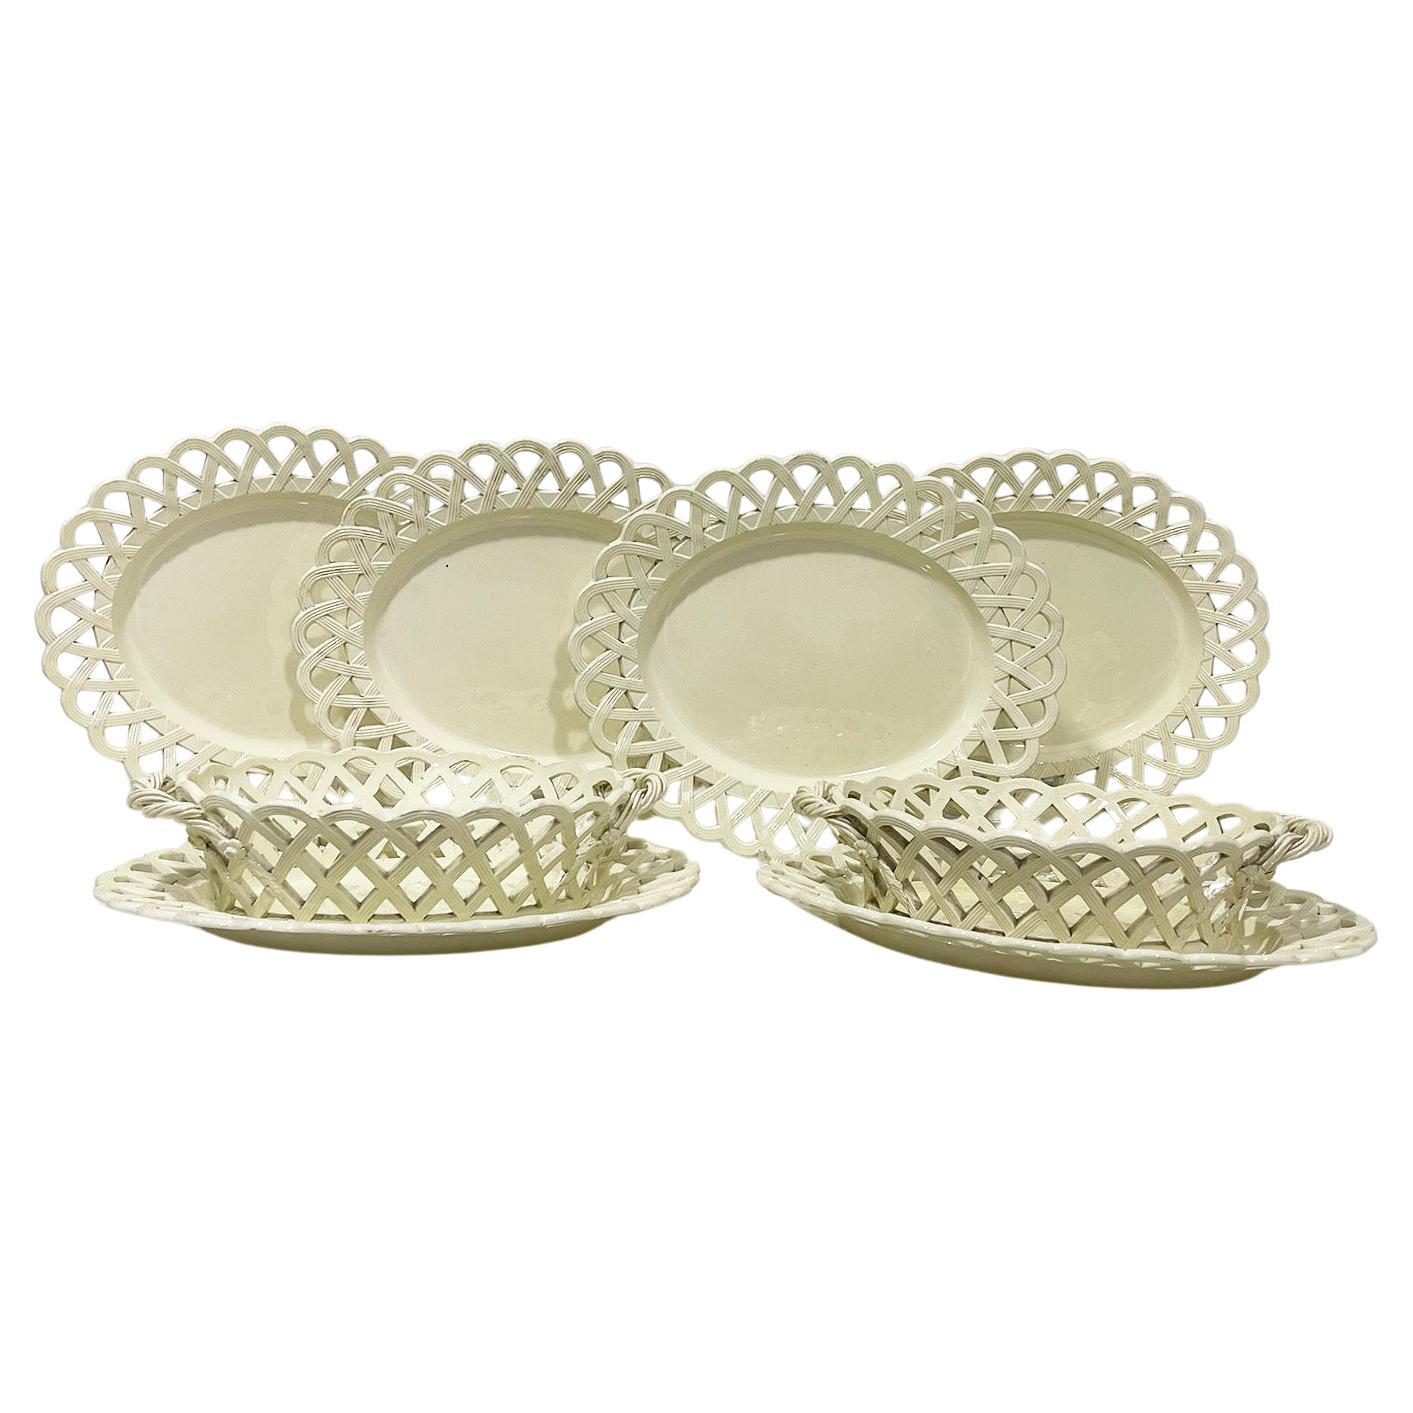 18th century English creamware baskets and plates For Sale